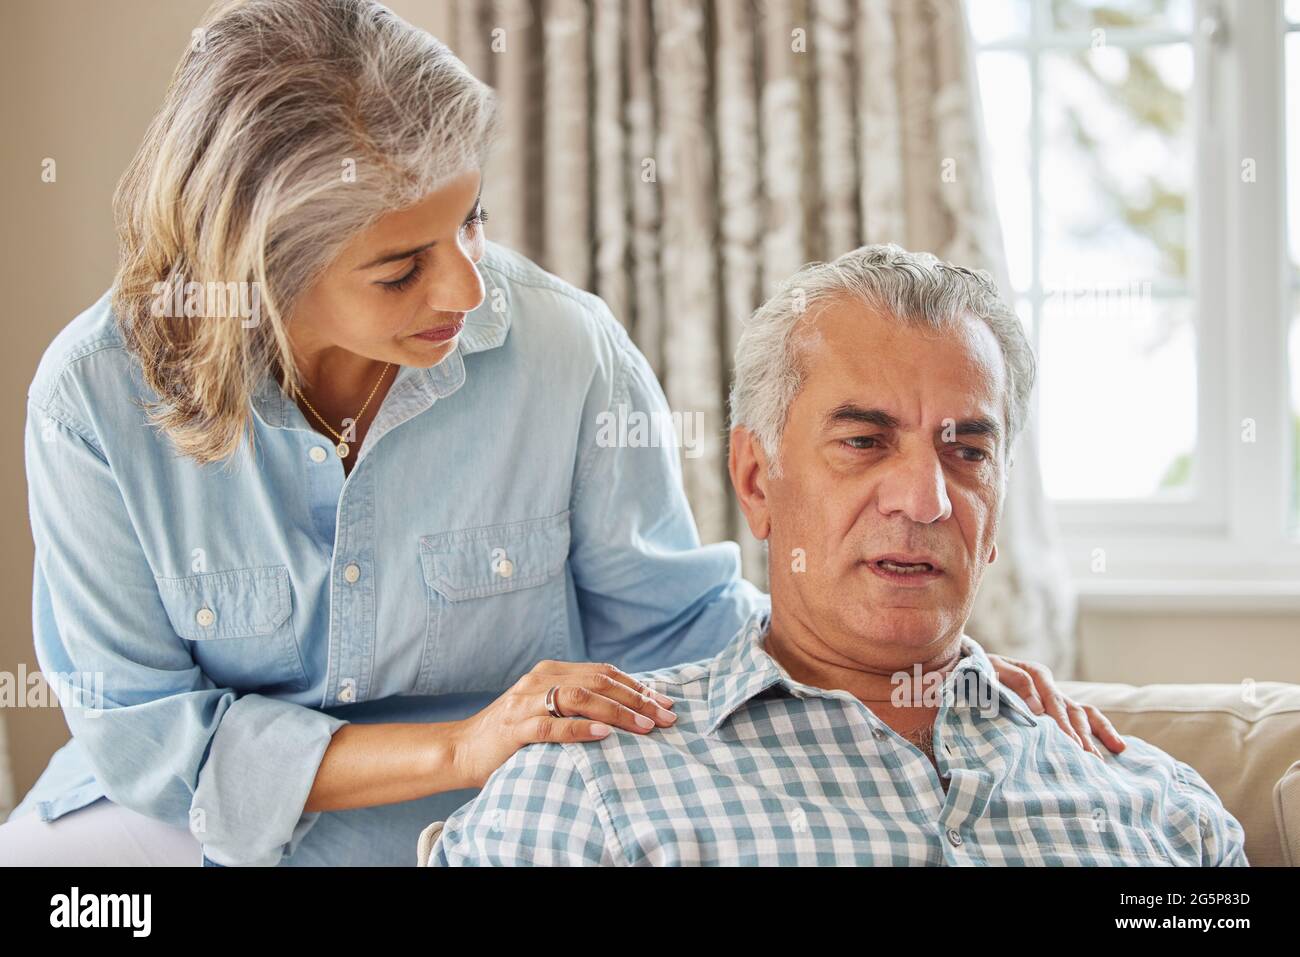 Mature Woman Comforting Man With Depression At Home Stock Photo